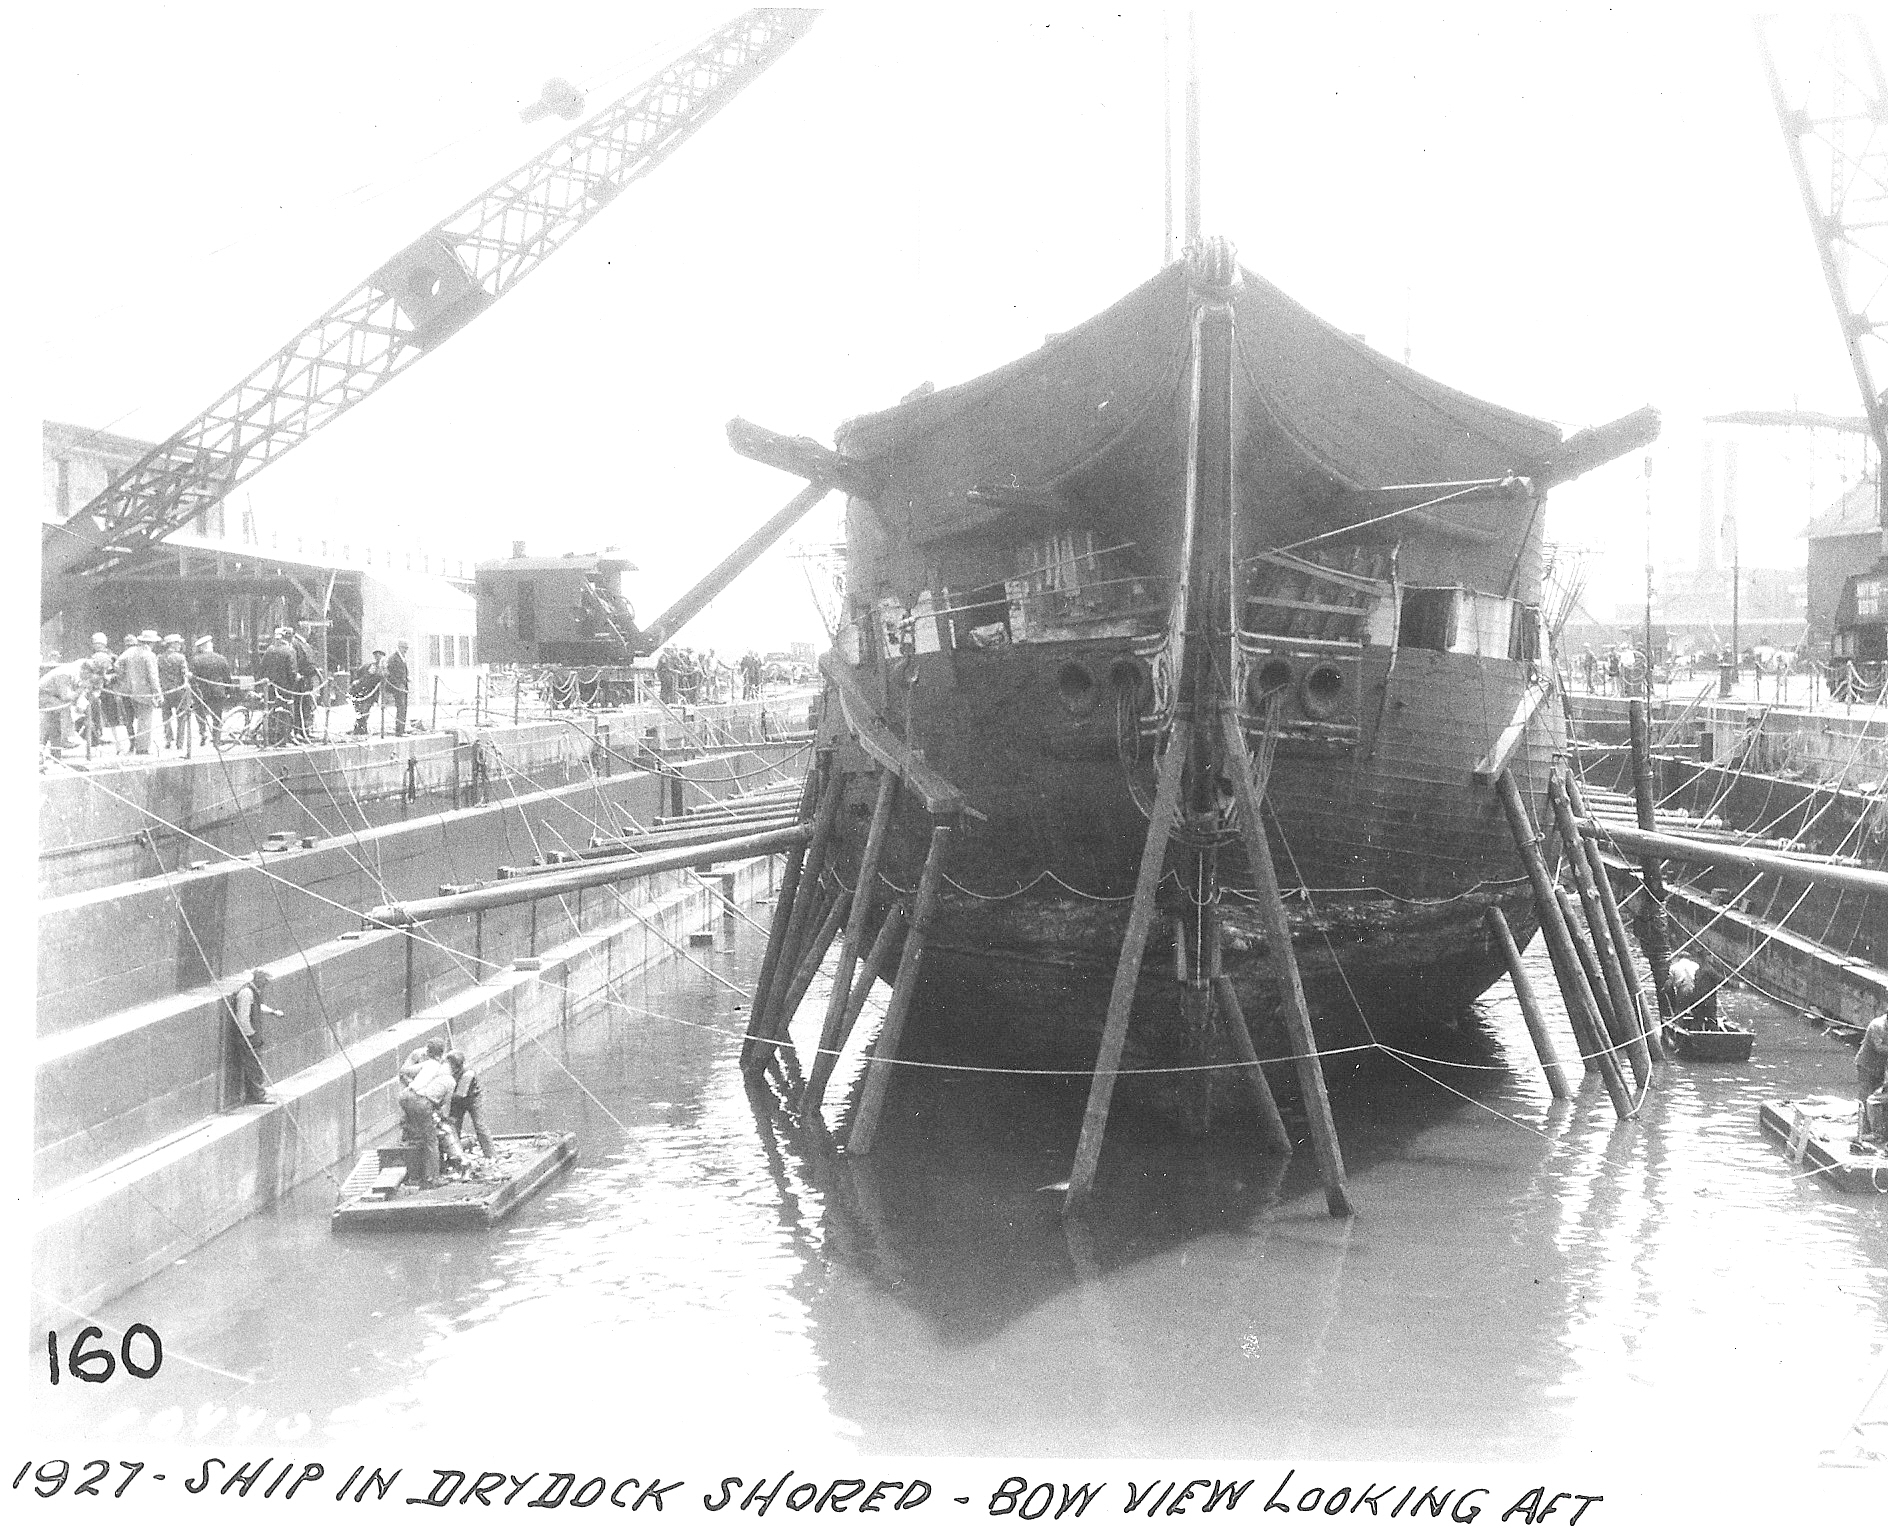 Constitution in Dry Dock 1, June 1927 [Courtesy Naval History & Heritage Command Detachment Boston]